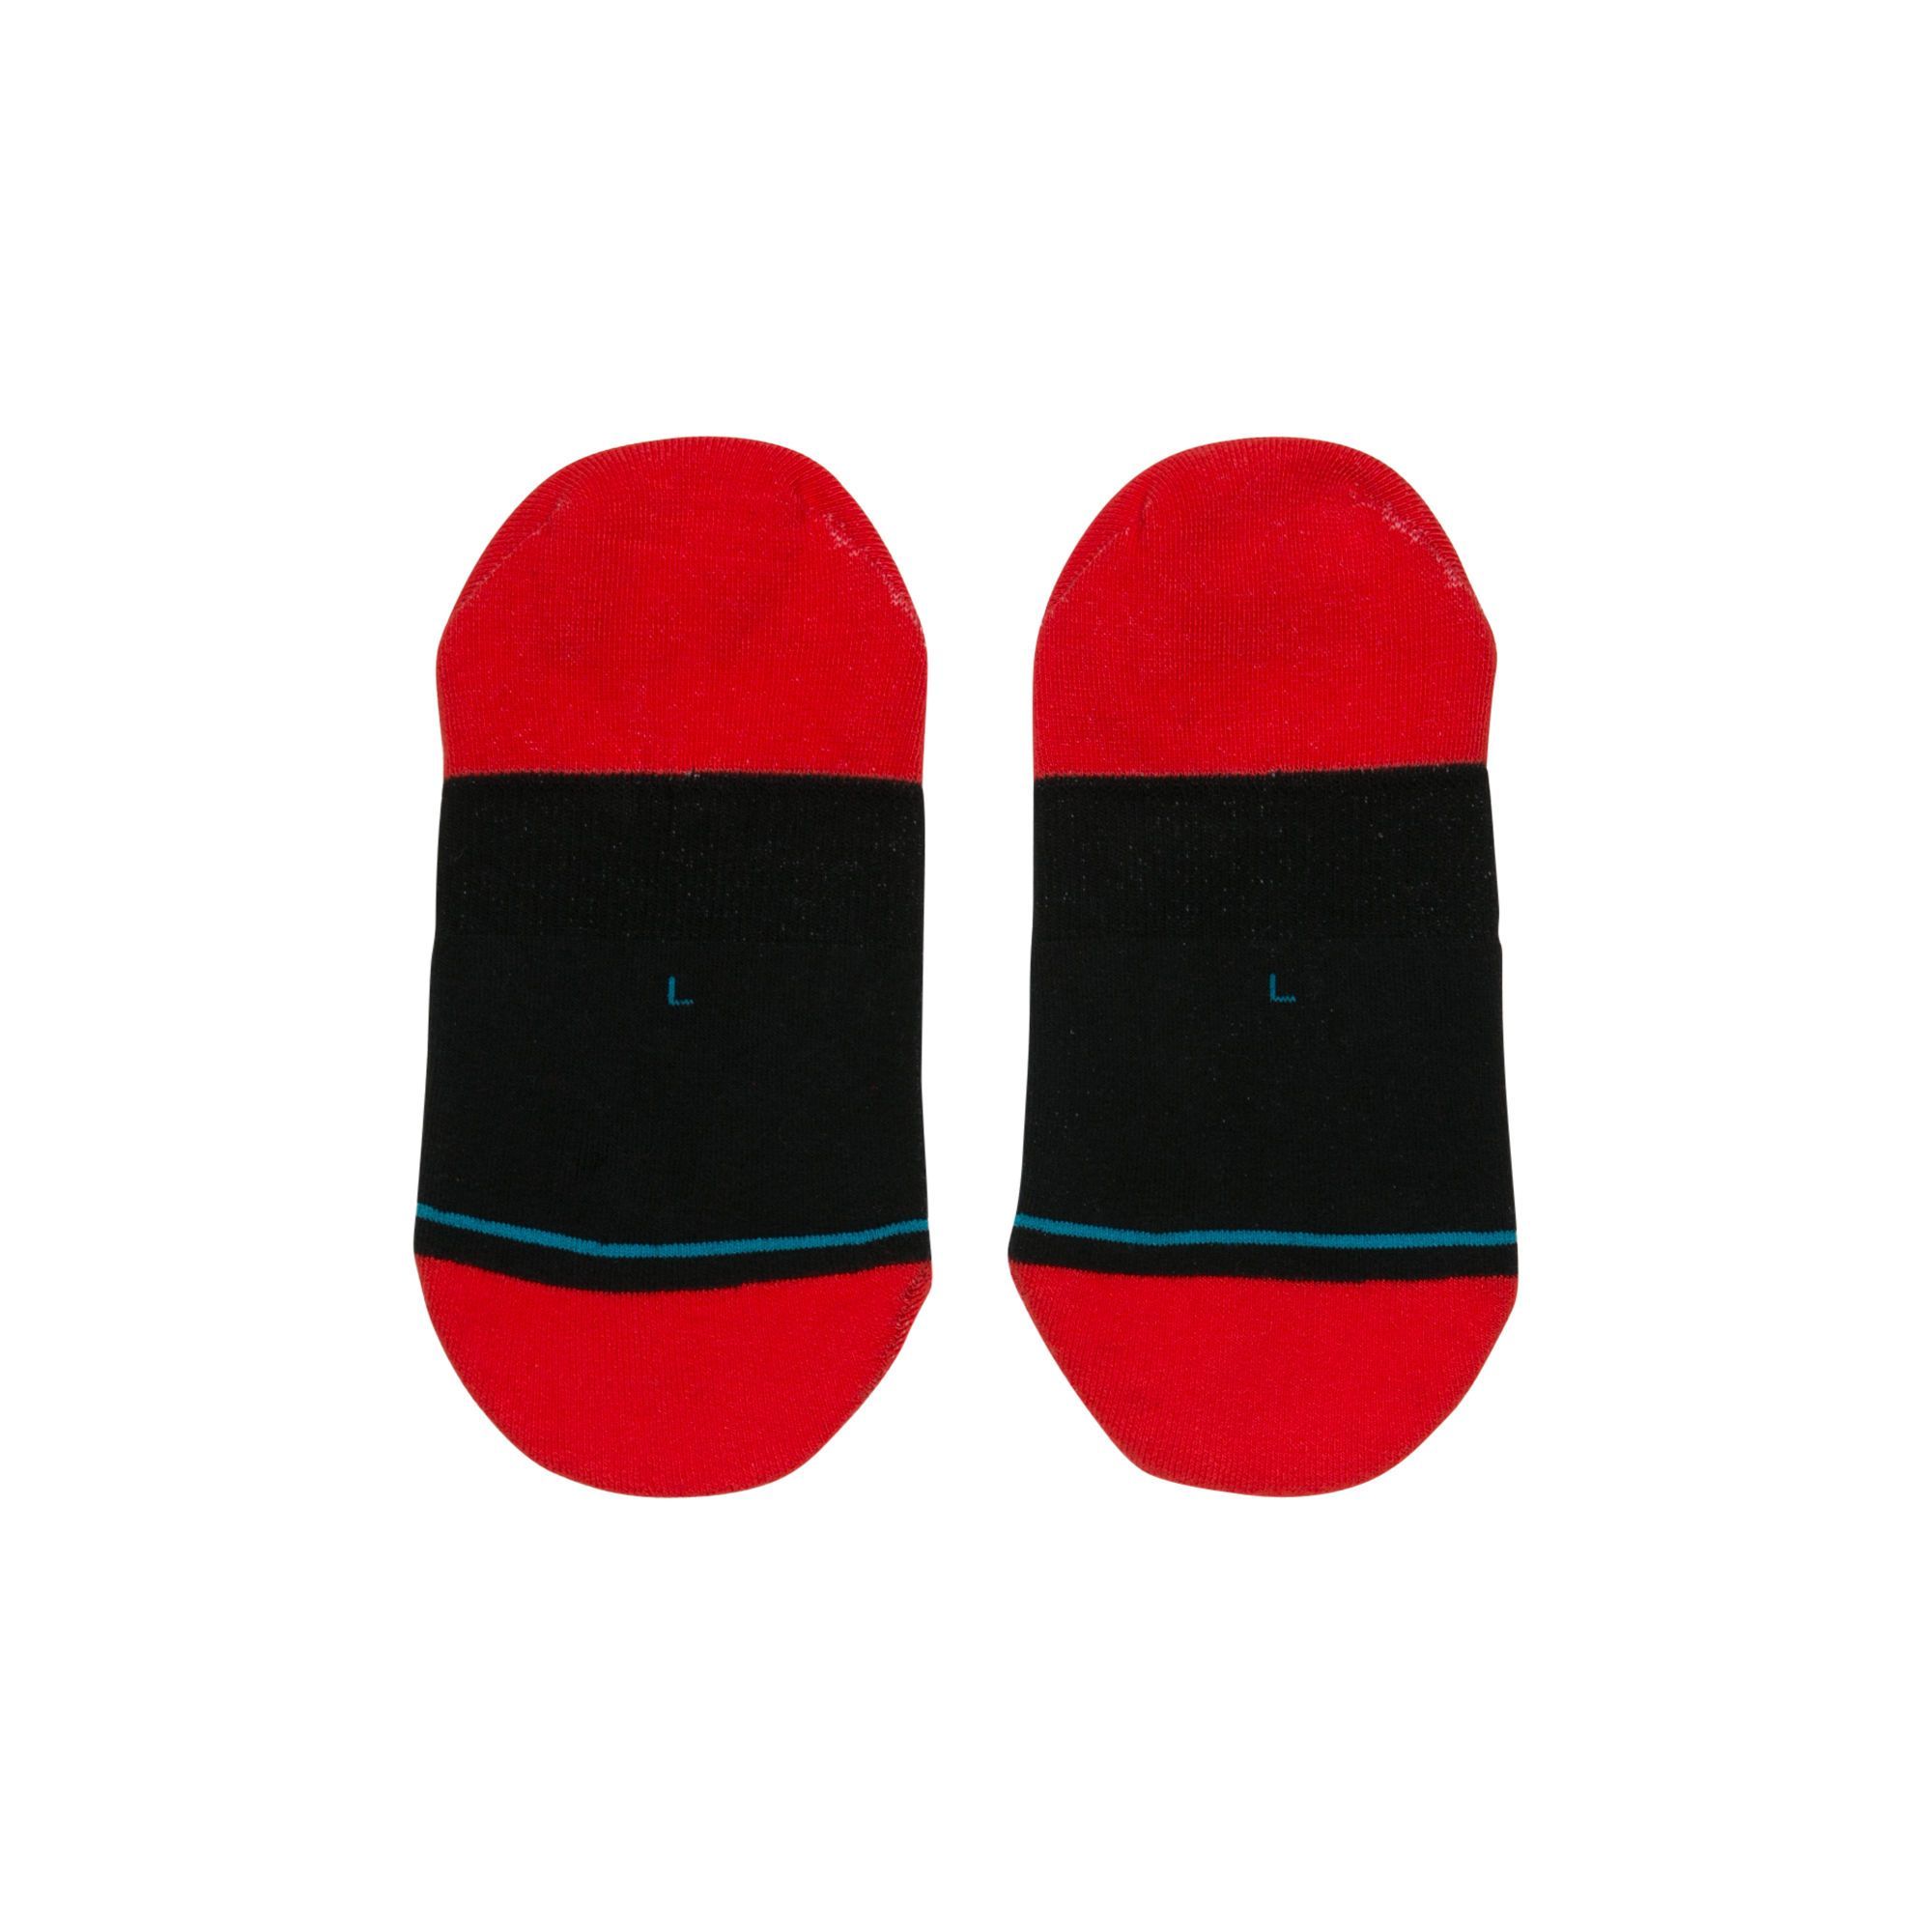 ACCESSORIES - Stance Socks NBA Chicago Bulls Invisible Red M115A18BUL-RED